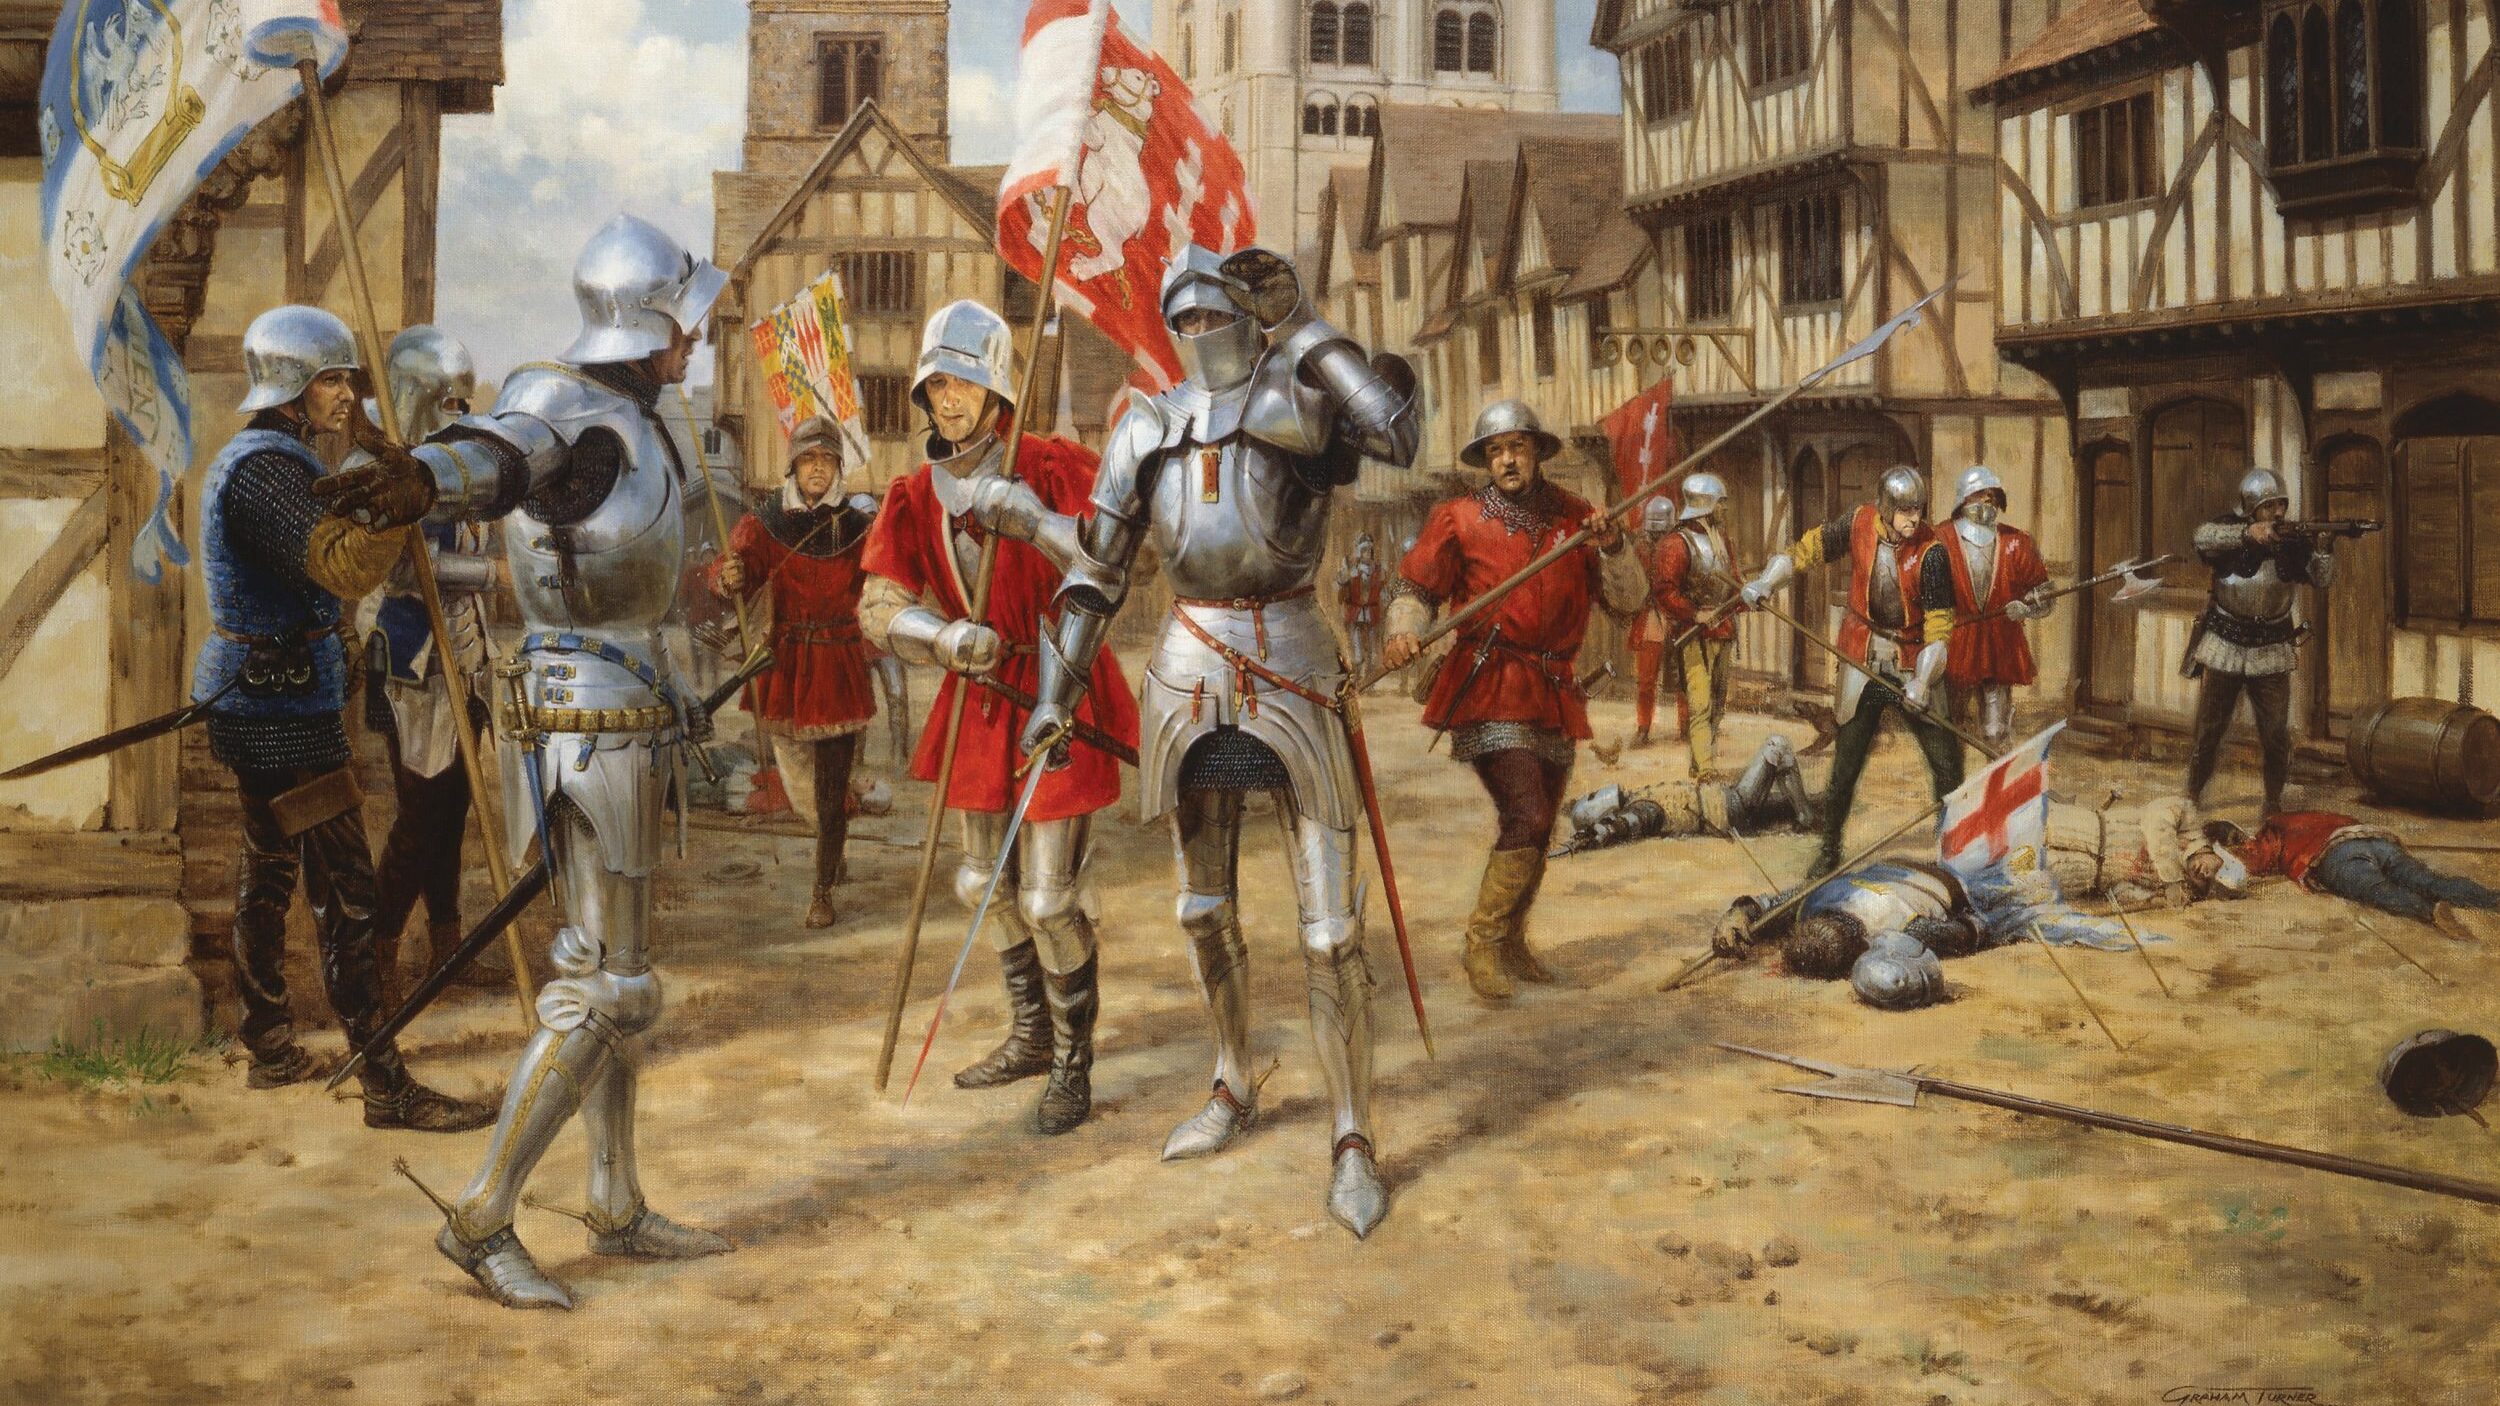 Yorkist troops led by the Earl of Warwick and the Duke of York storm through the streets of St. Albans on May 22, 1455. The rebels captured King Henry VI, killed the Duke of Somerset, and ignited the 30-year-long War of the Roses. Painting by Graham Turner.